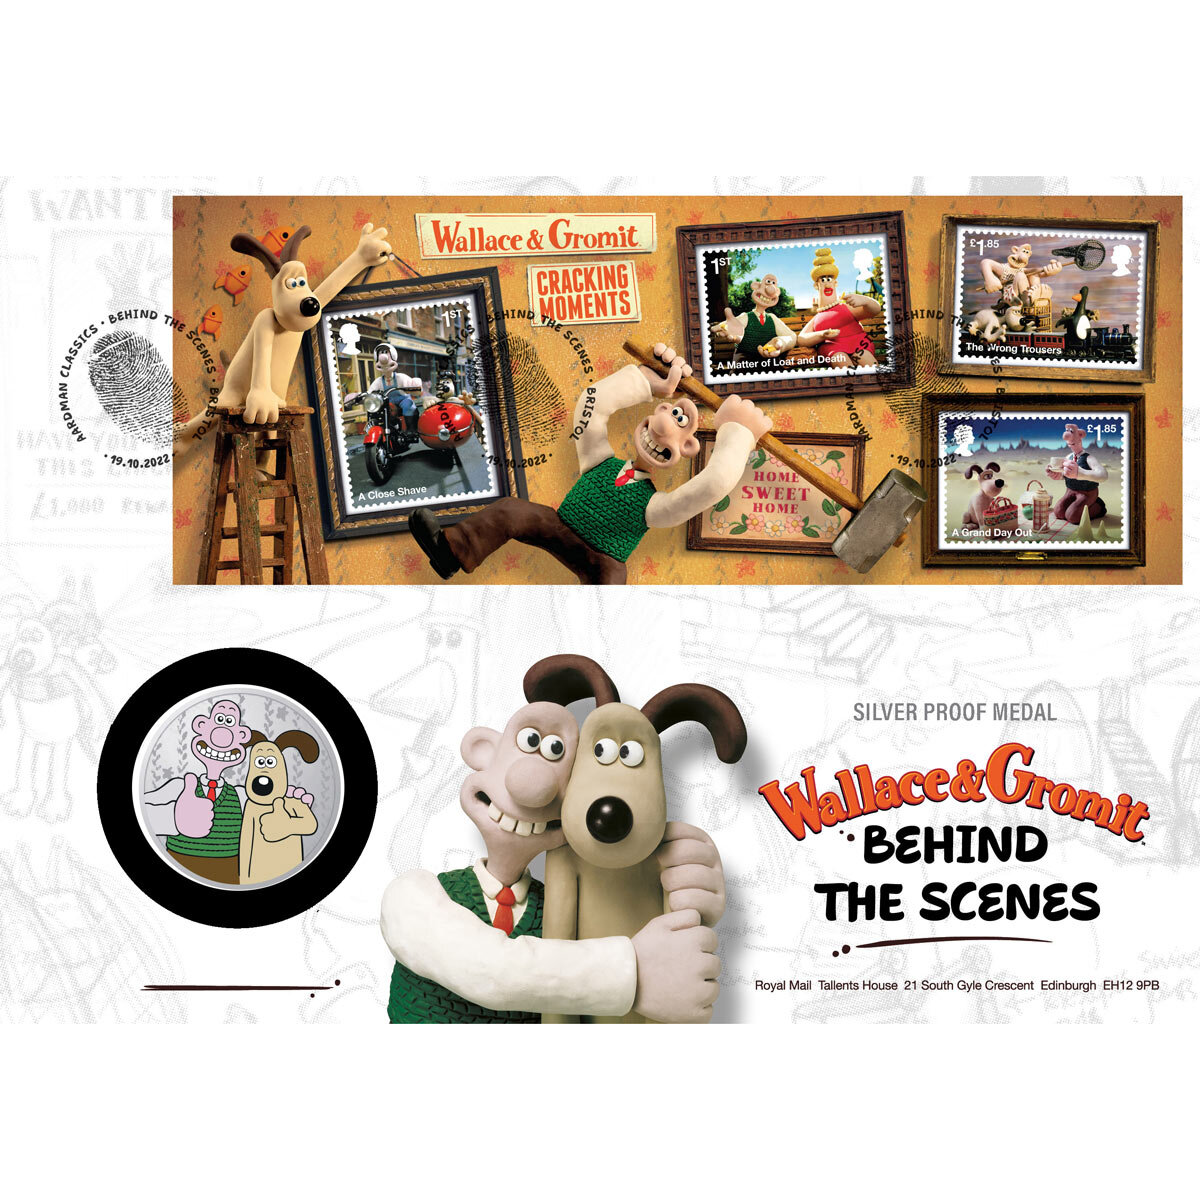 Buy  Aardman Classic Silver Proof Medal Cover Envolope Image at Costco.co.uk